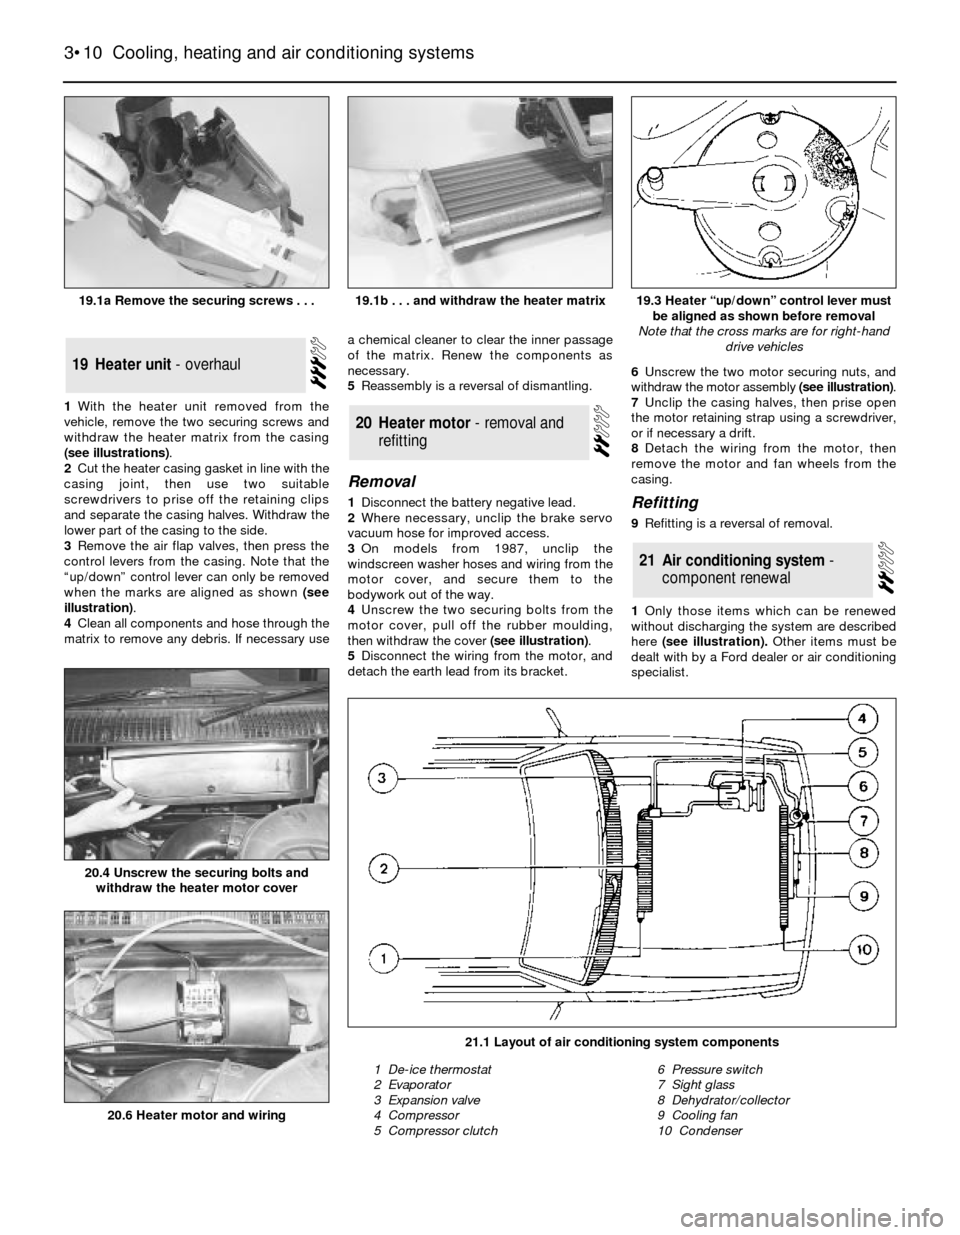 FORD SIERRA 1985 1.G Cooling And Air Conditioning Systems Workshop Manual 1With the heater unit removed from the
vehicle, remove the two securing screws and
withdraw the heater matrix from the casing
(see illustrations).
2Cut the heater casing gasket in line with the
casing